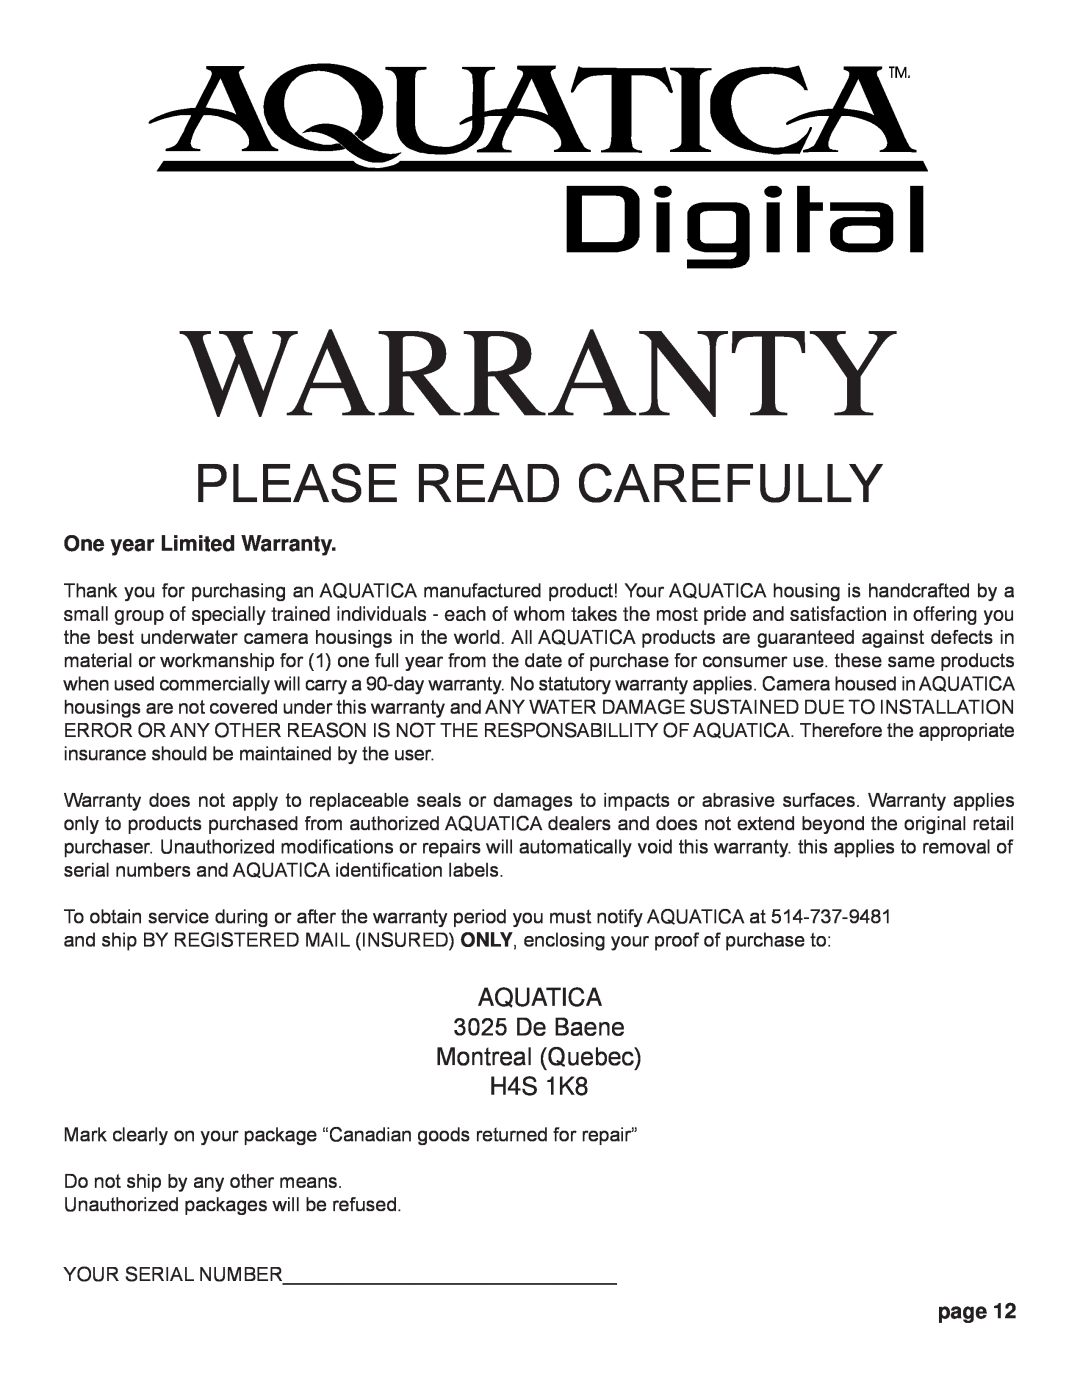 Nikon D300s manual One year Limited Warranty, Please Read Carefully, AQUATICA 3025 De Baene Montreal Quebec H4S 1K8, page 